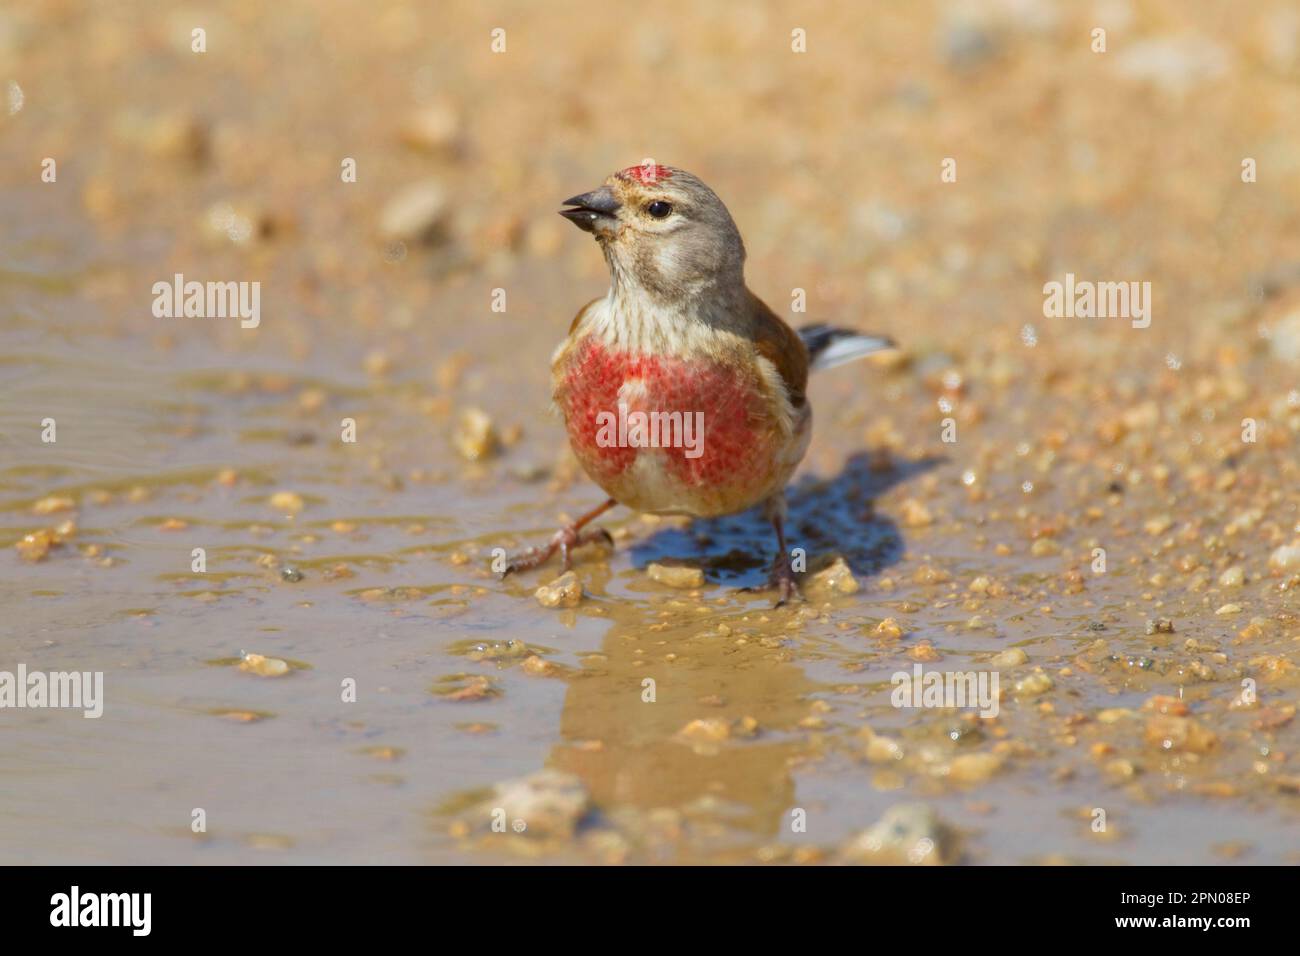 Acanthis cannabina, linnet ematico, linnet ematico, linnet ematico (Carduelis cannabina), linnet, uccelli canori, animali, uccelli, Finches, Eurasian Linnet adulto Foto Stock